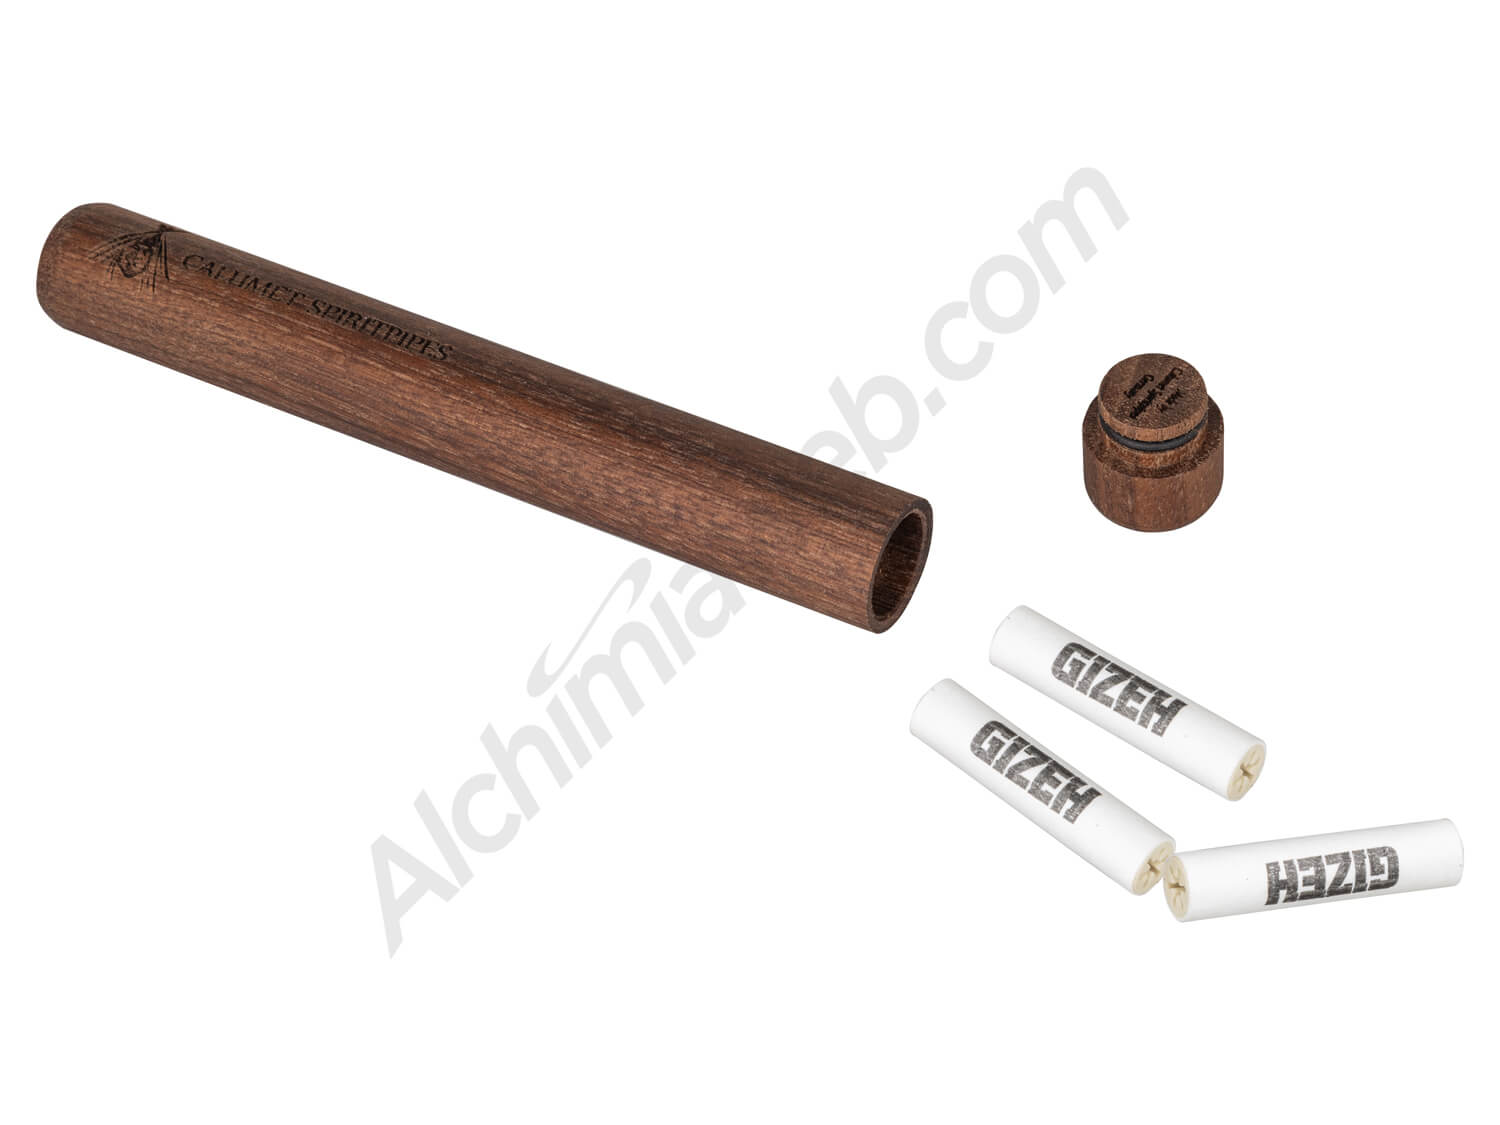 Jtube wooden cone for cigarettes